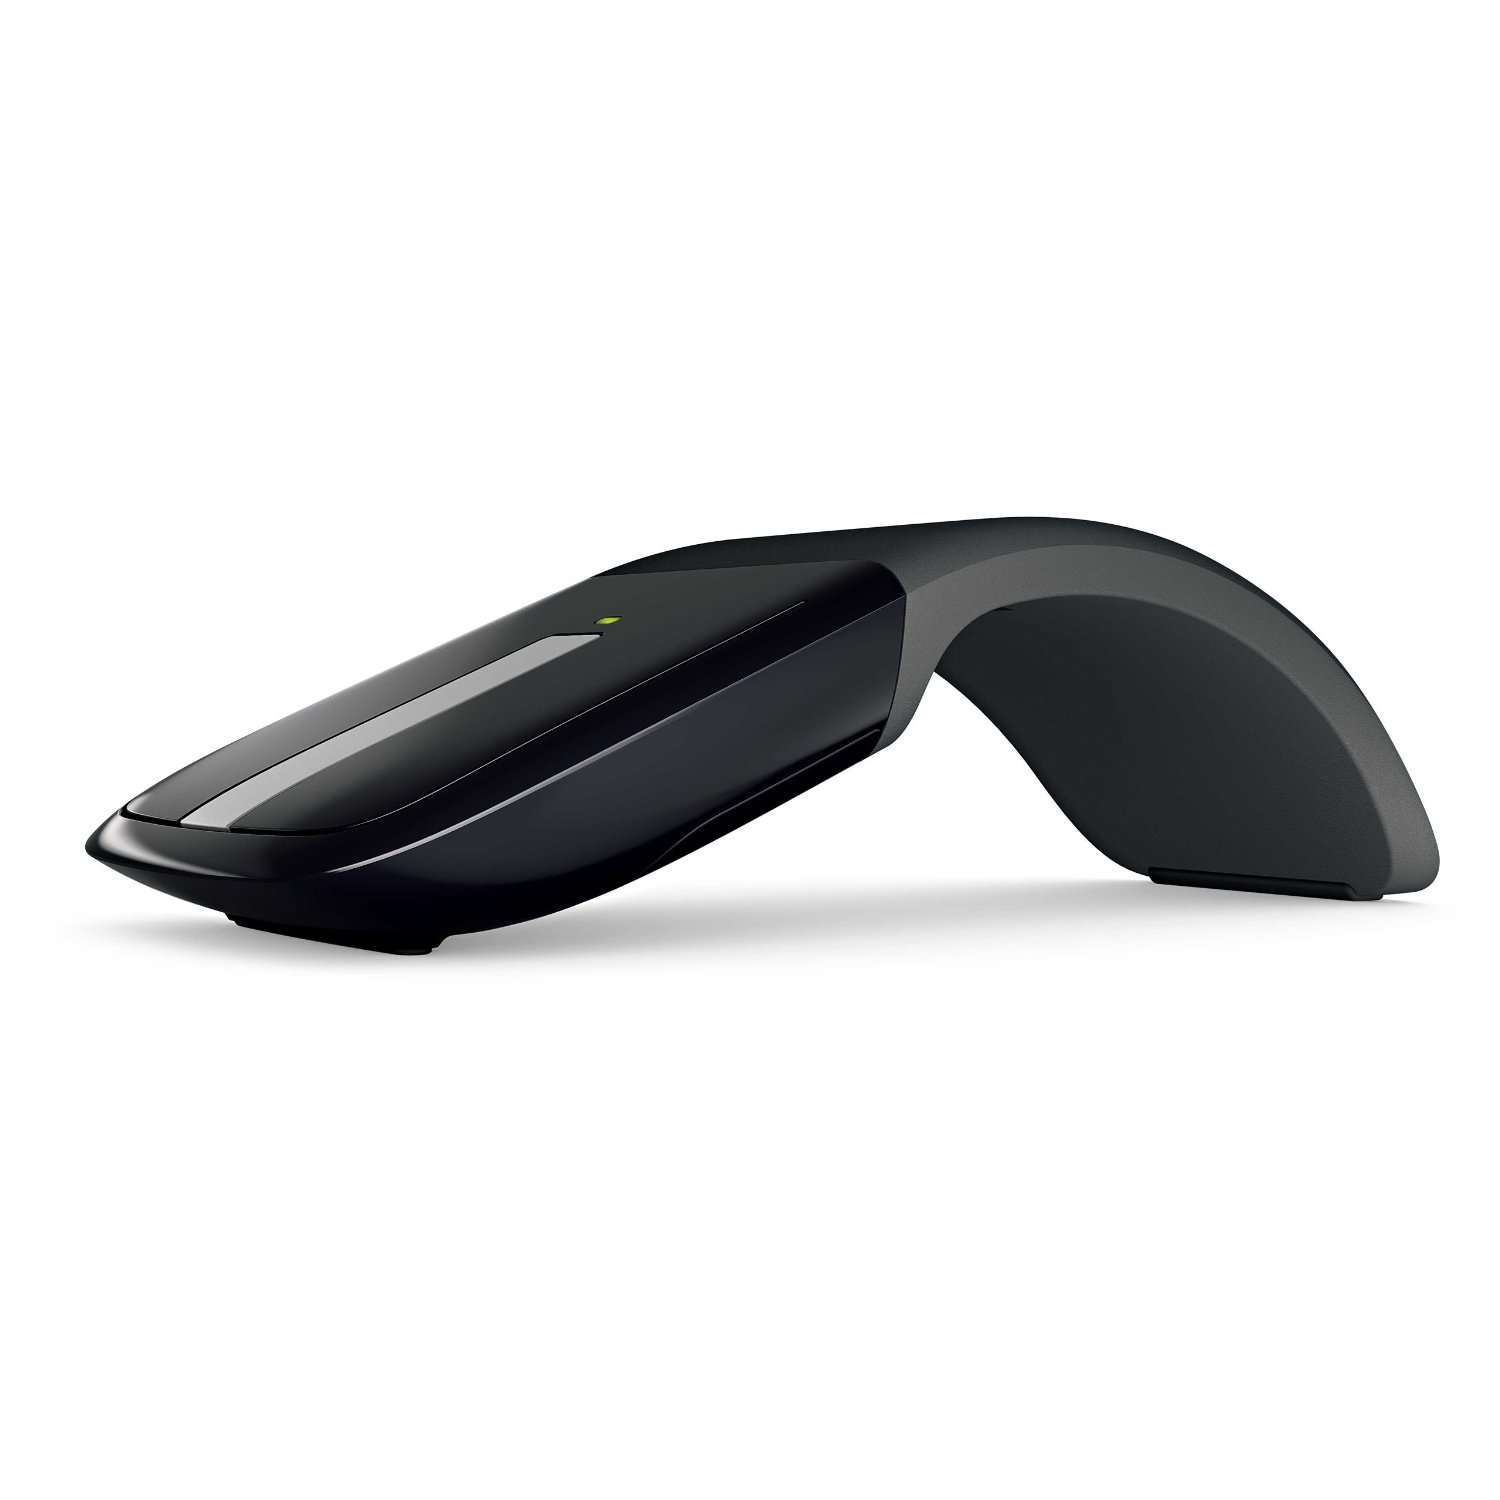 Microsoft Arc Touch Mouse (Black), only $29.99